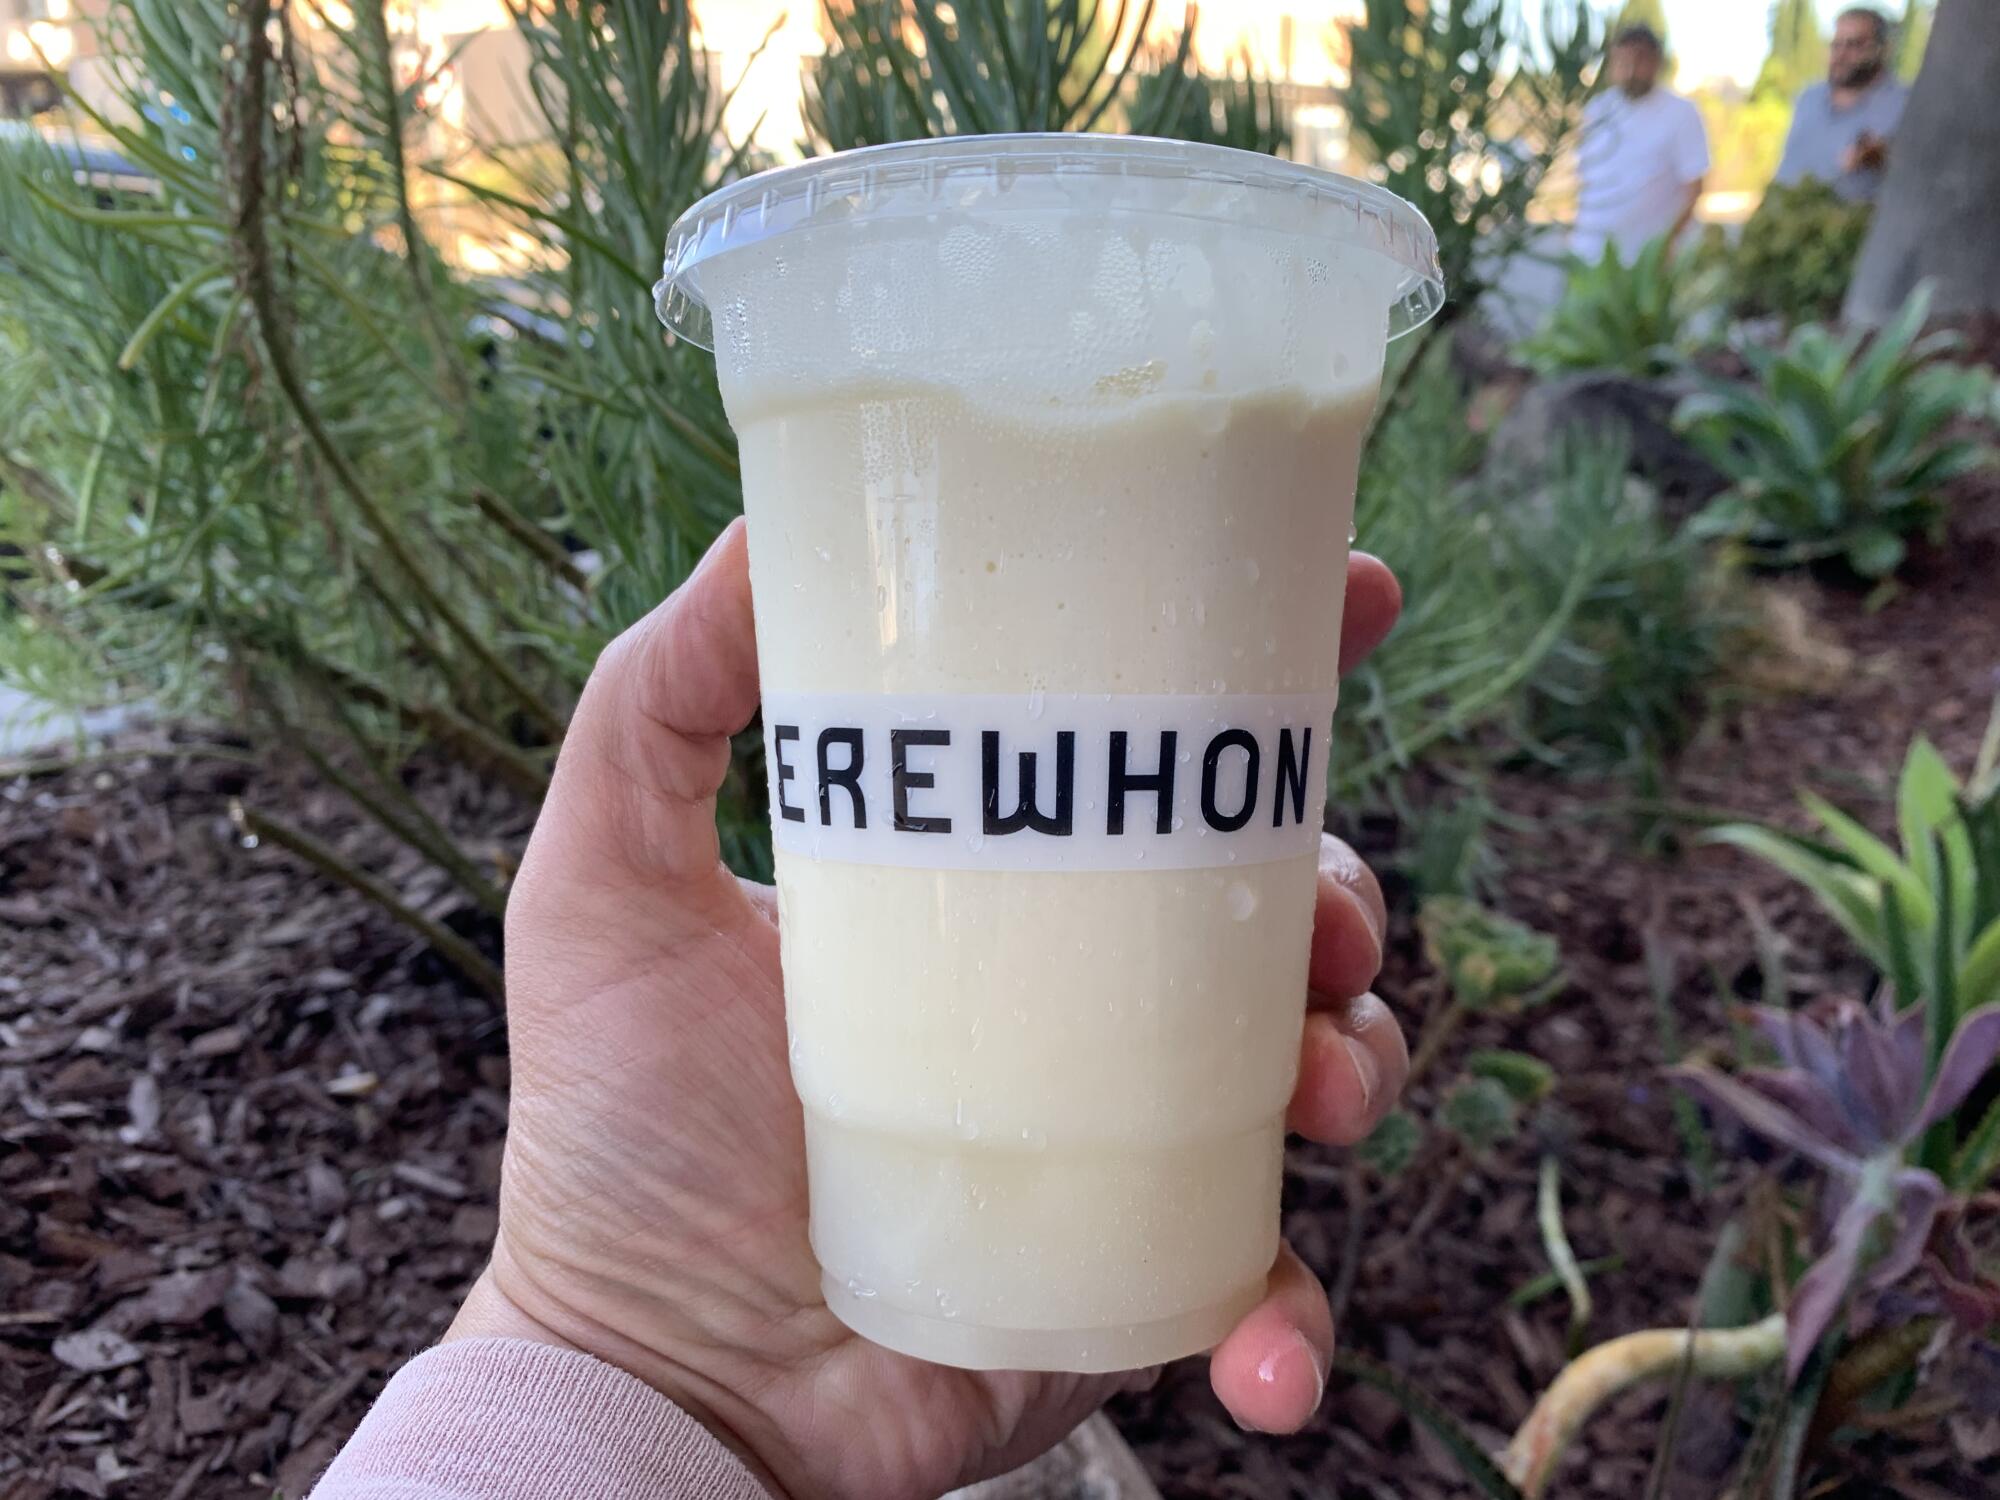 A hand holds a pale yellow smoothie in a plastic cup that says Erewhon.